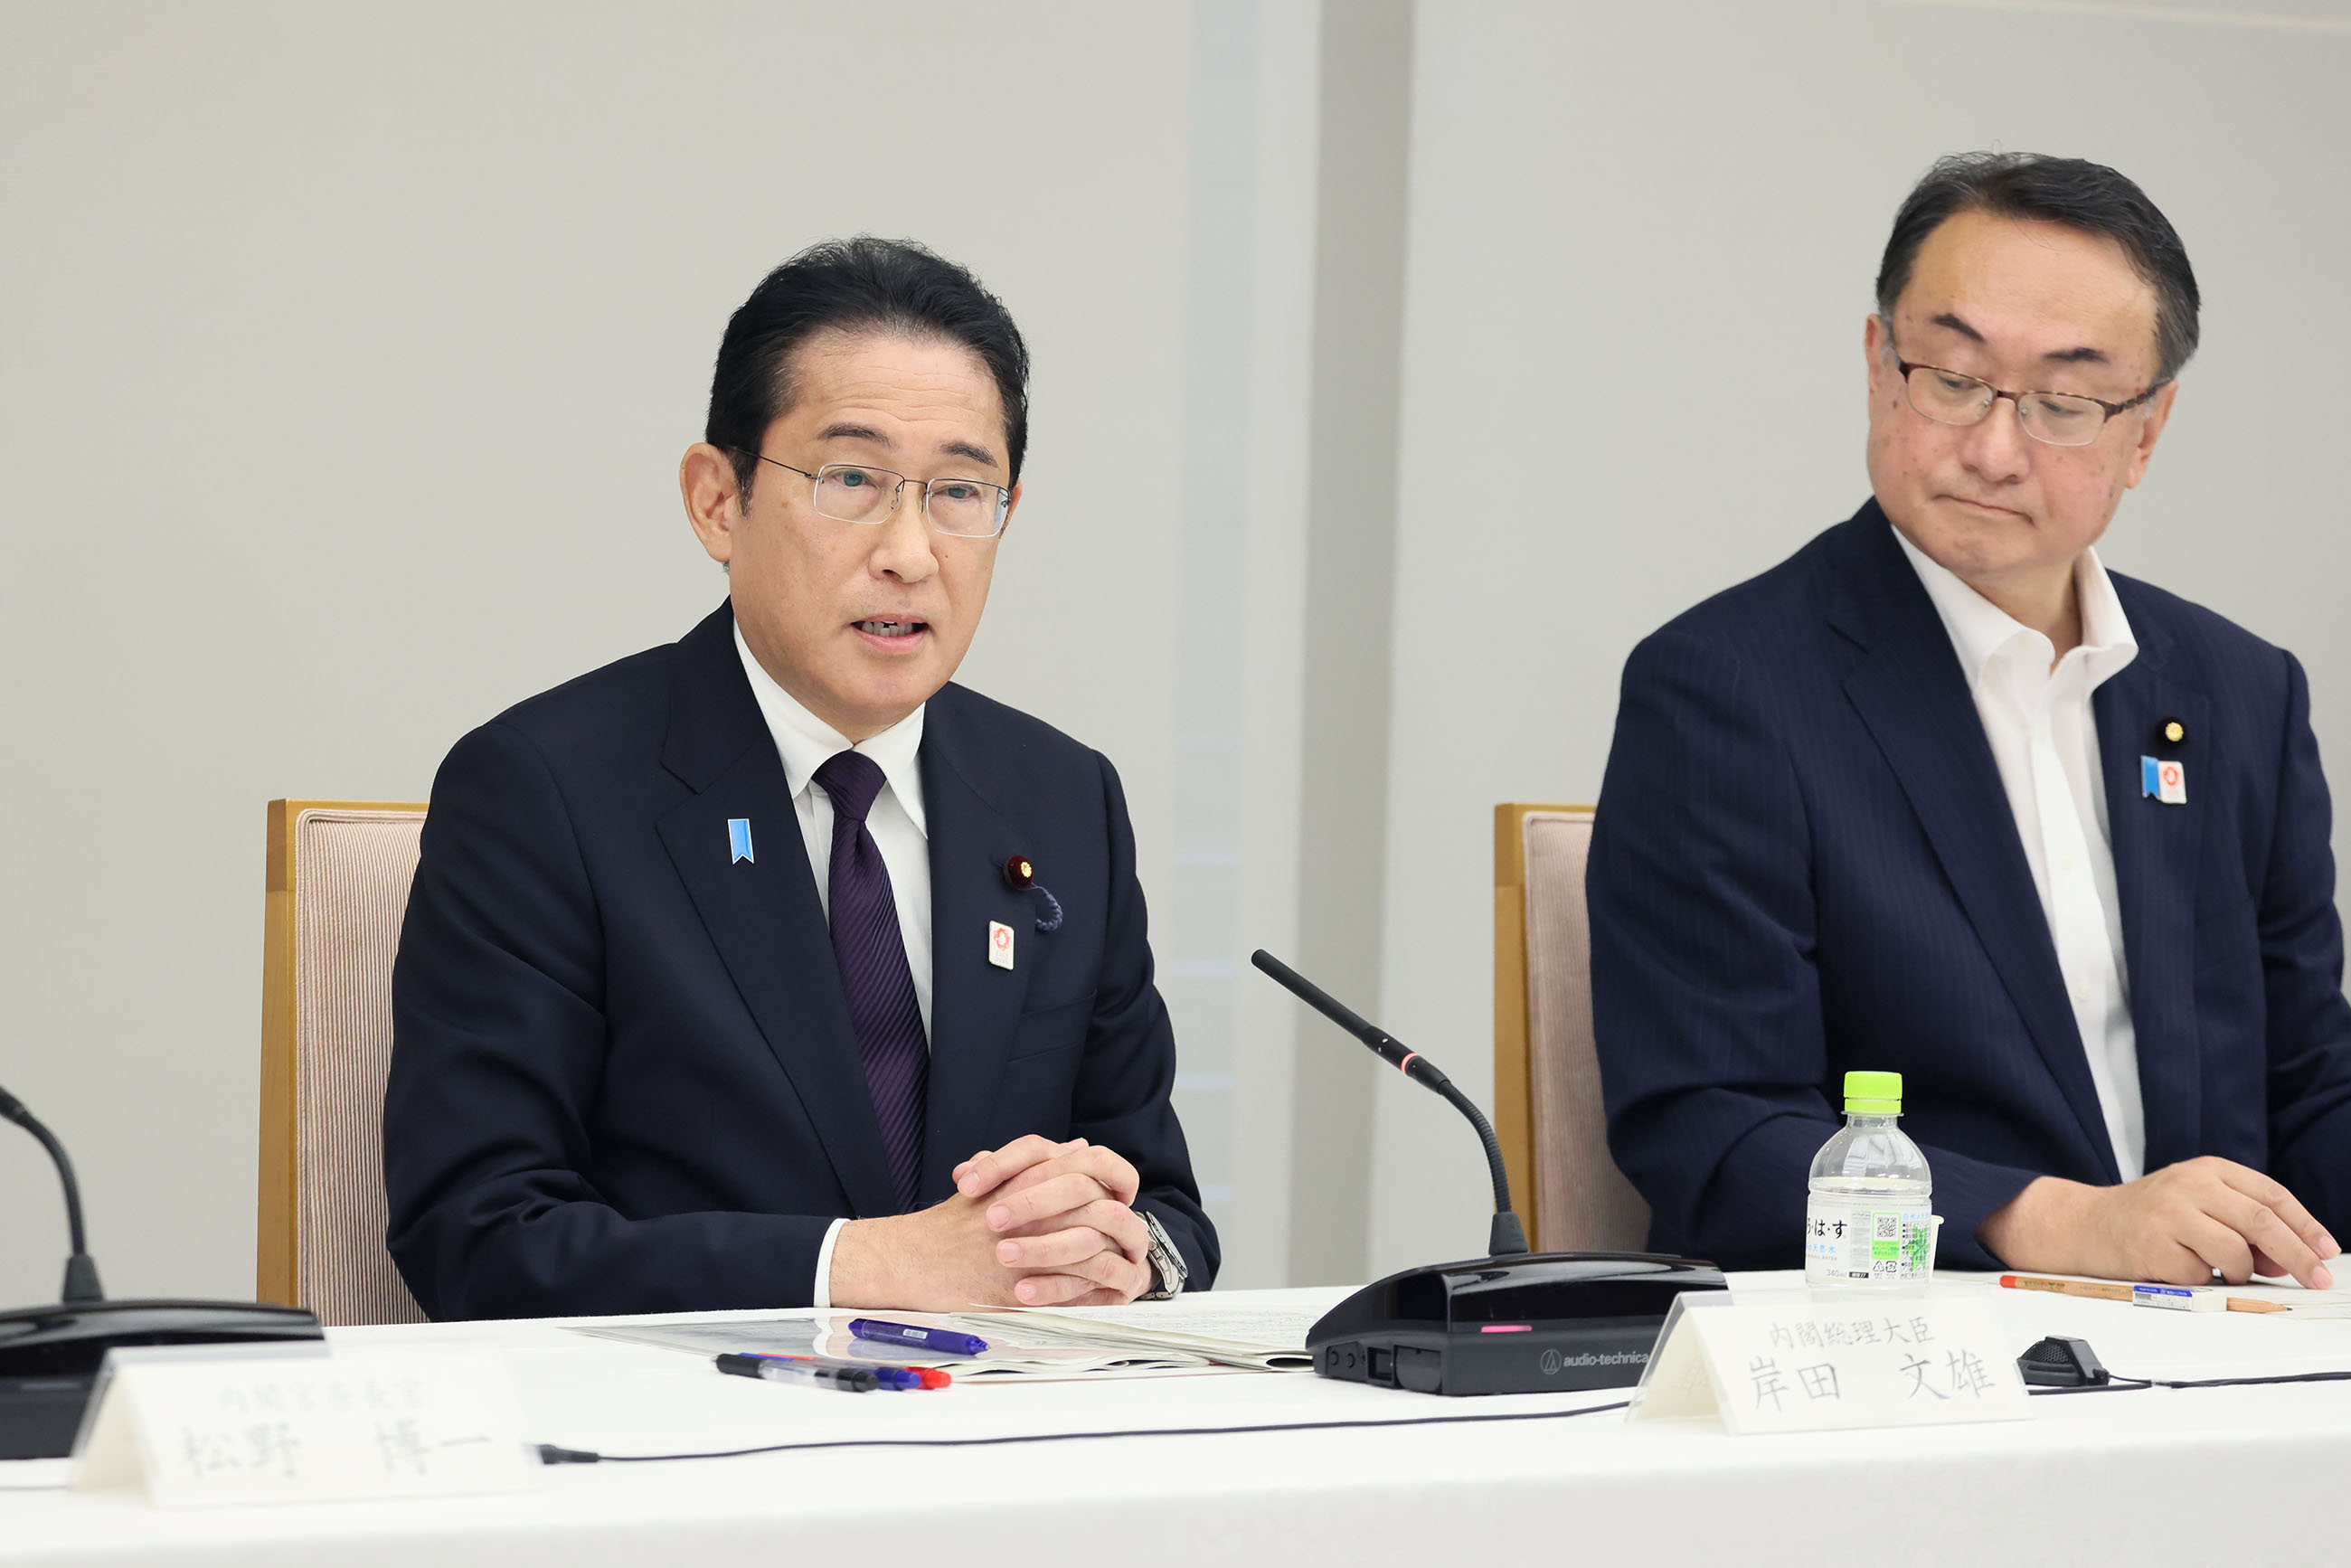 Prime Minister Kishida wrapping up a meeting